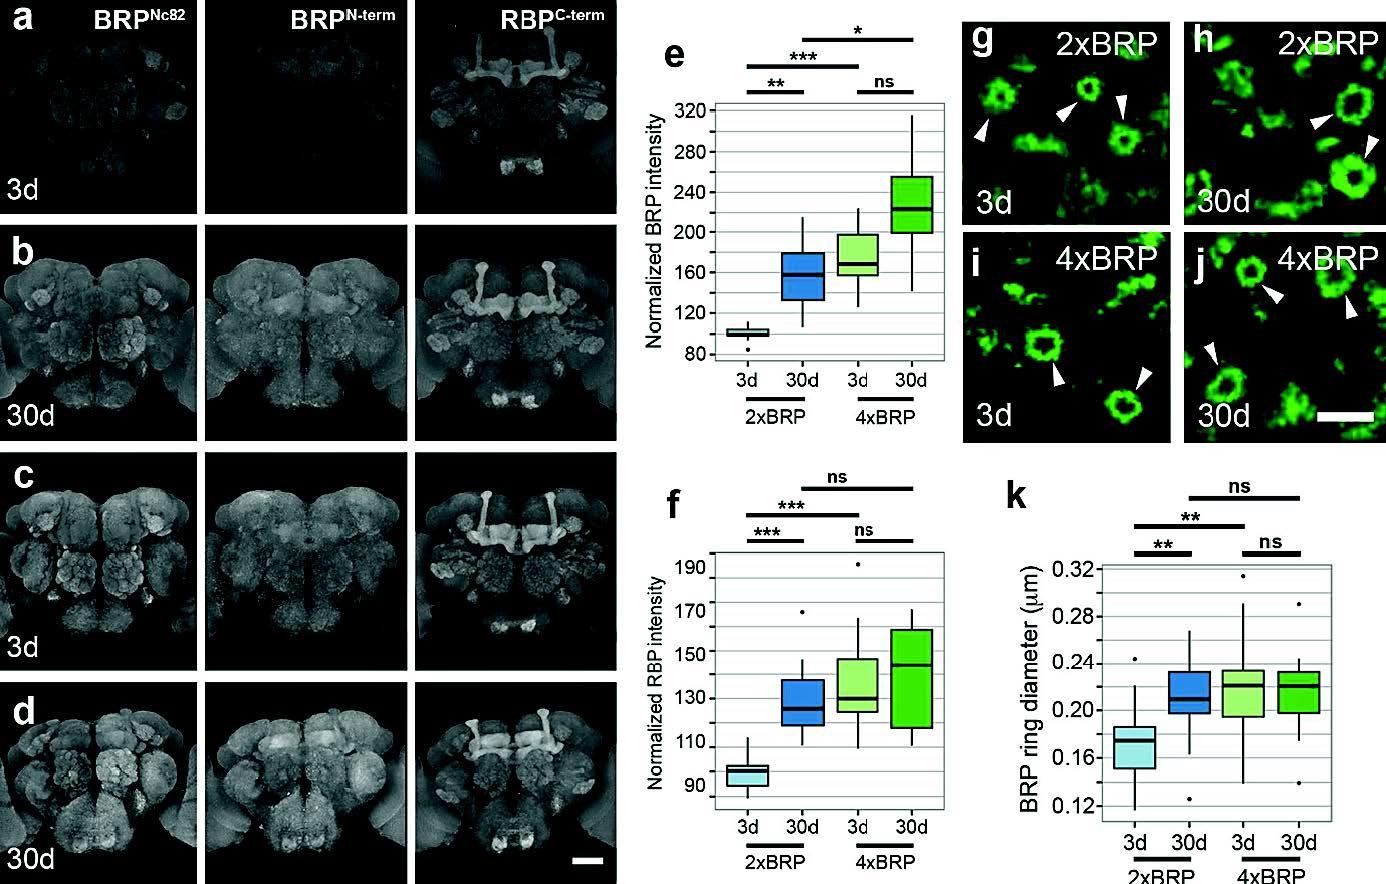 Ultrastructural, opto-physiological and behavioral analysis of synaptic organization within the aging Drosophila olfactory system.